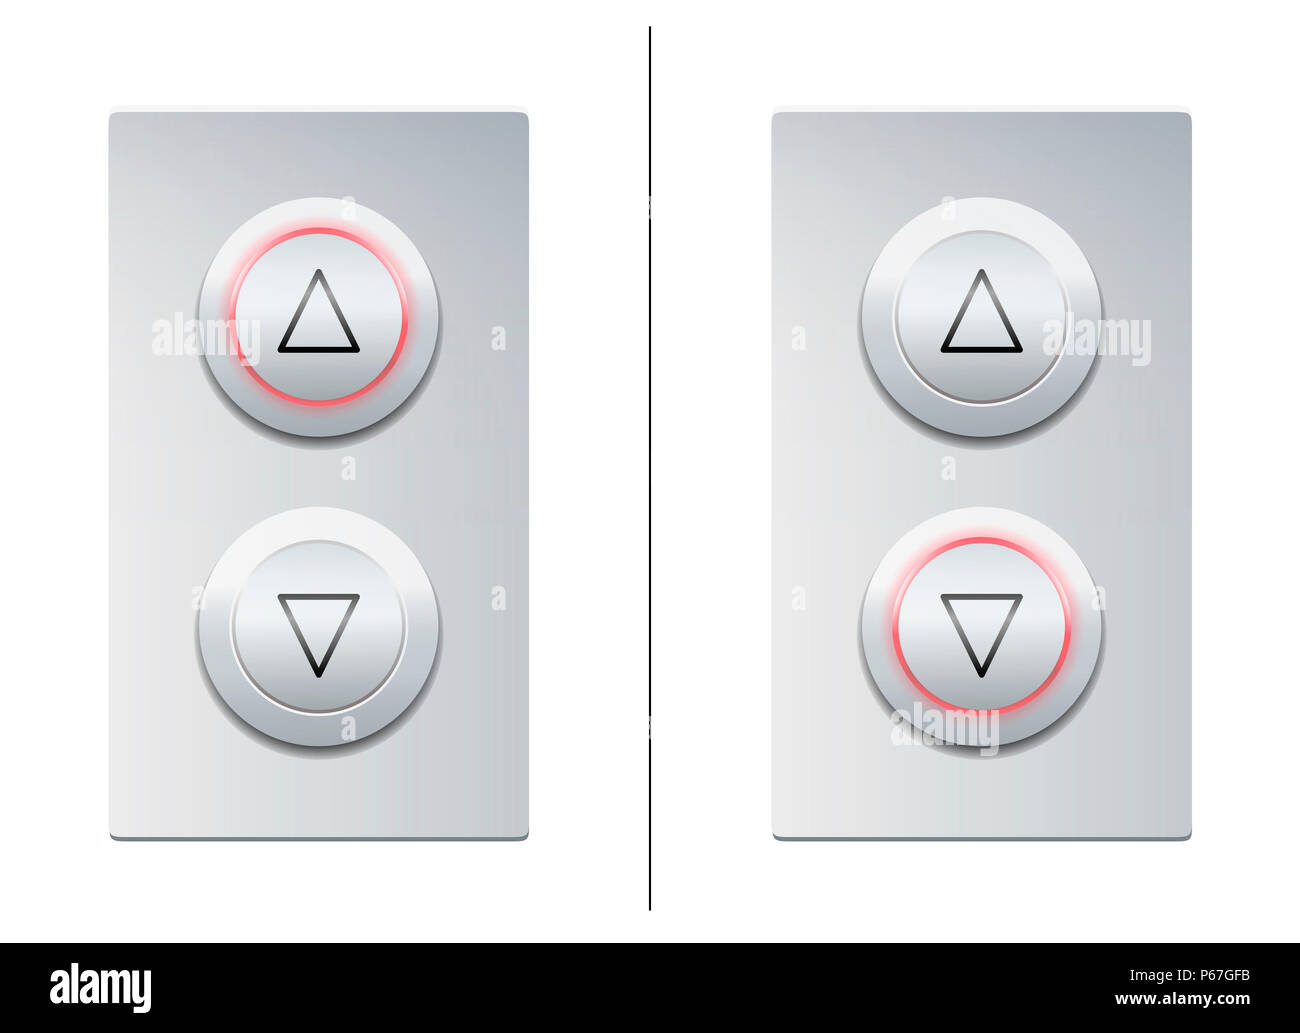 Lift call buttons with arrows to choose upwards or downwards - illustration on white background. Stock Photo